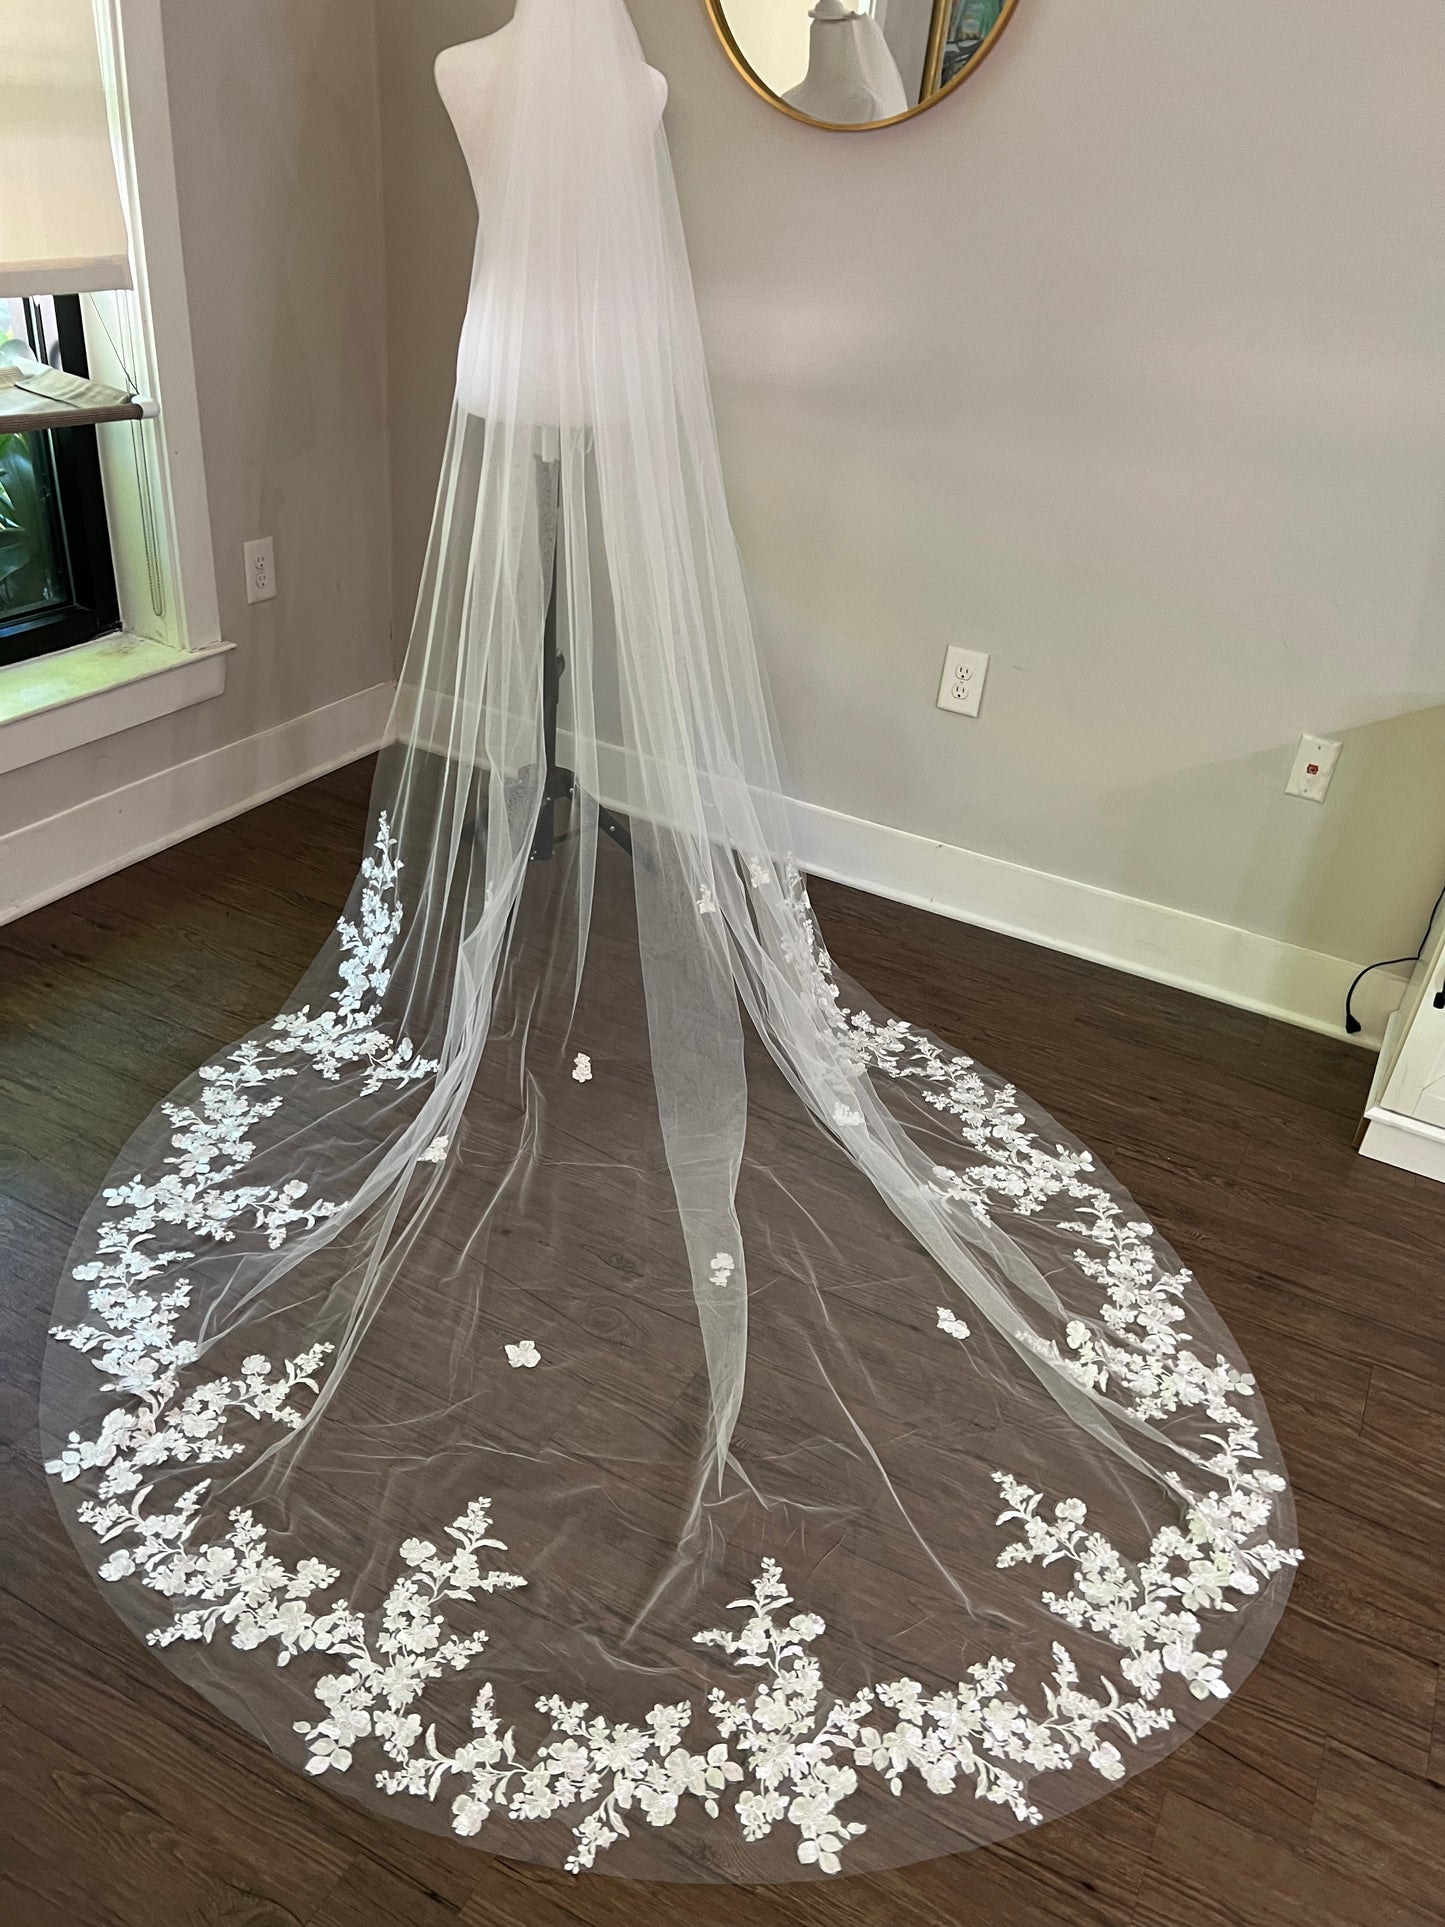 Elegant Circular Floor Length Floral Lace Embroidered Trim Wedding Veil with Comb